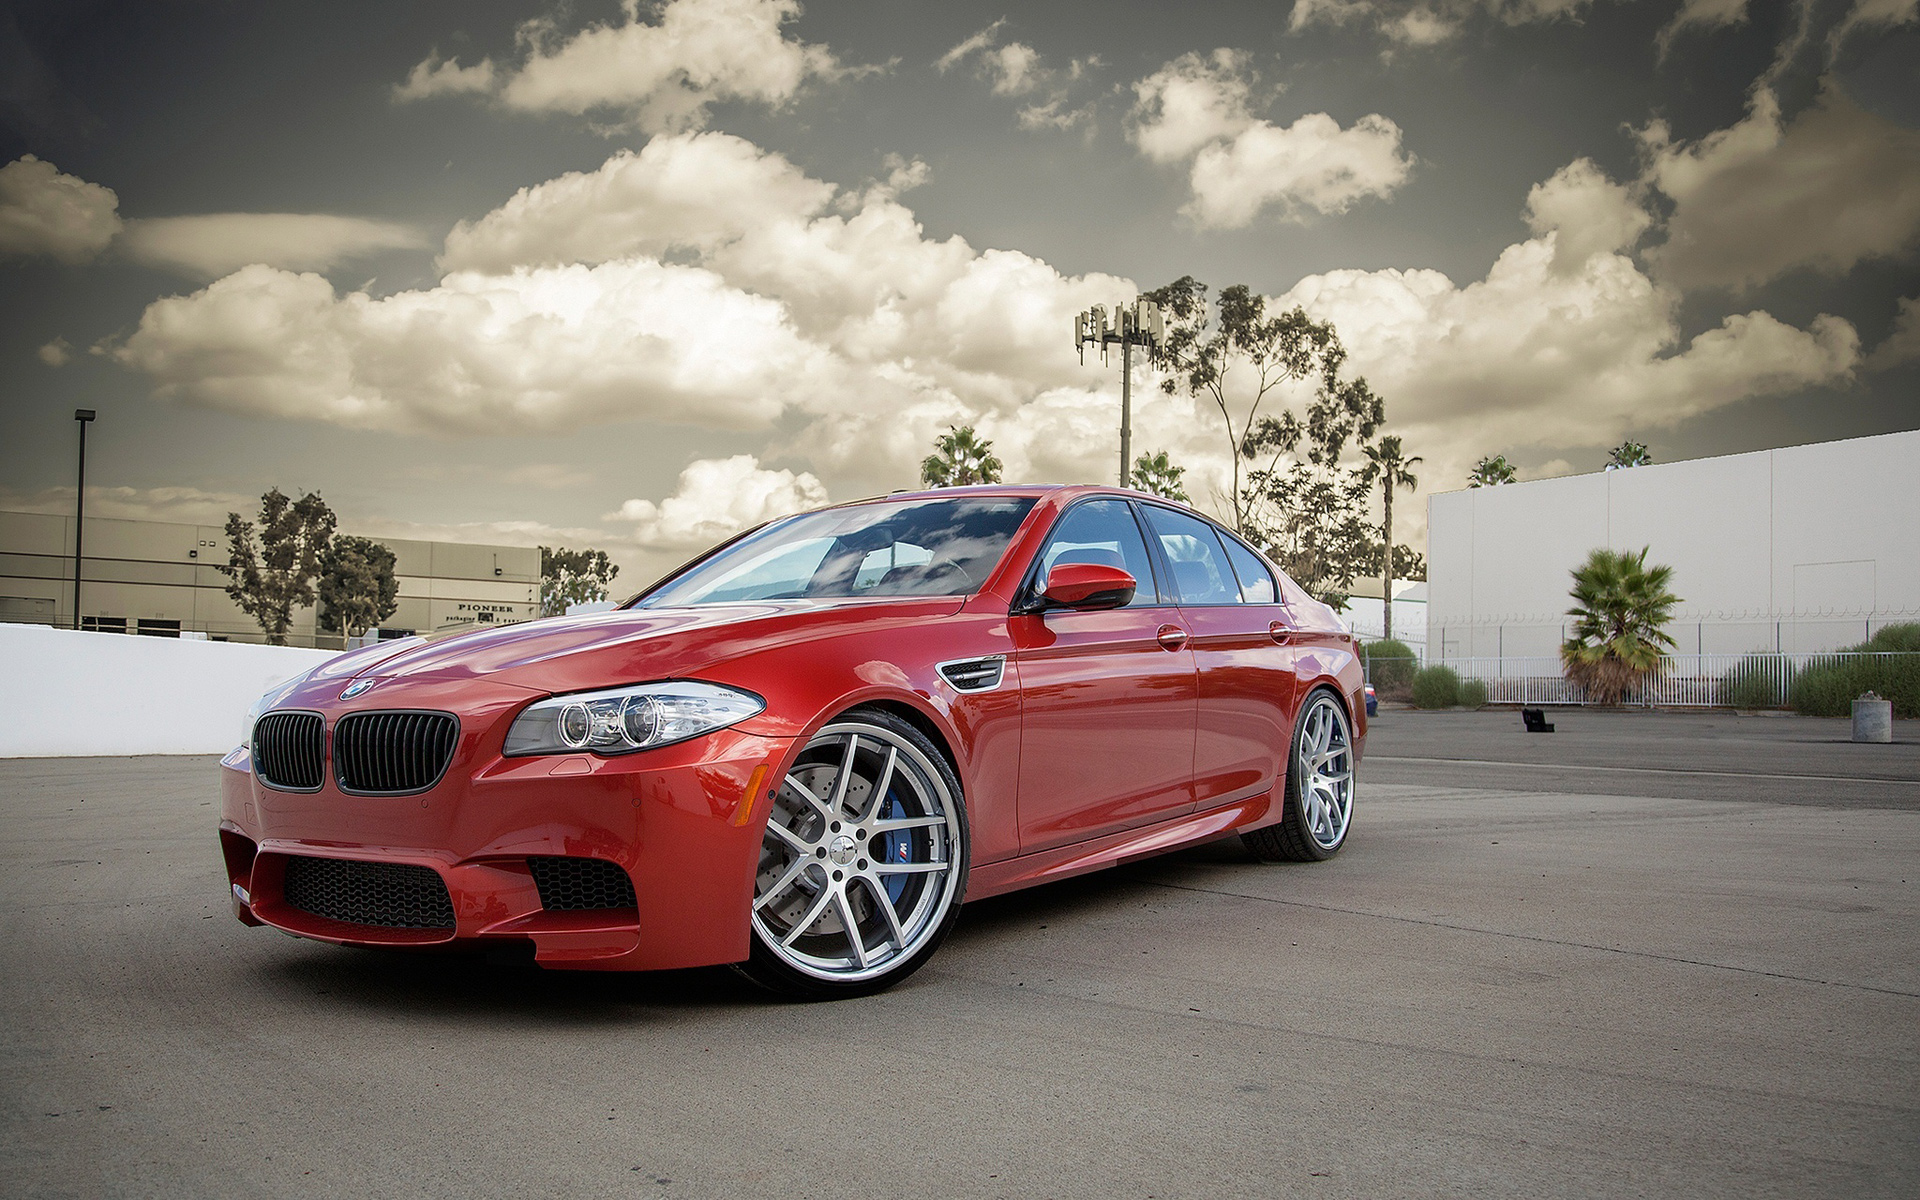 Red Bmw M5 F10 Wallpaper And Stock Photos Visual Cocaine